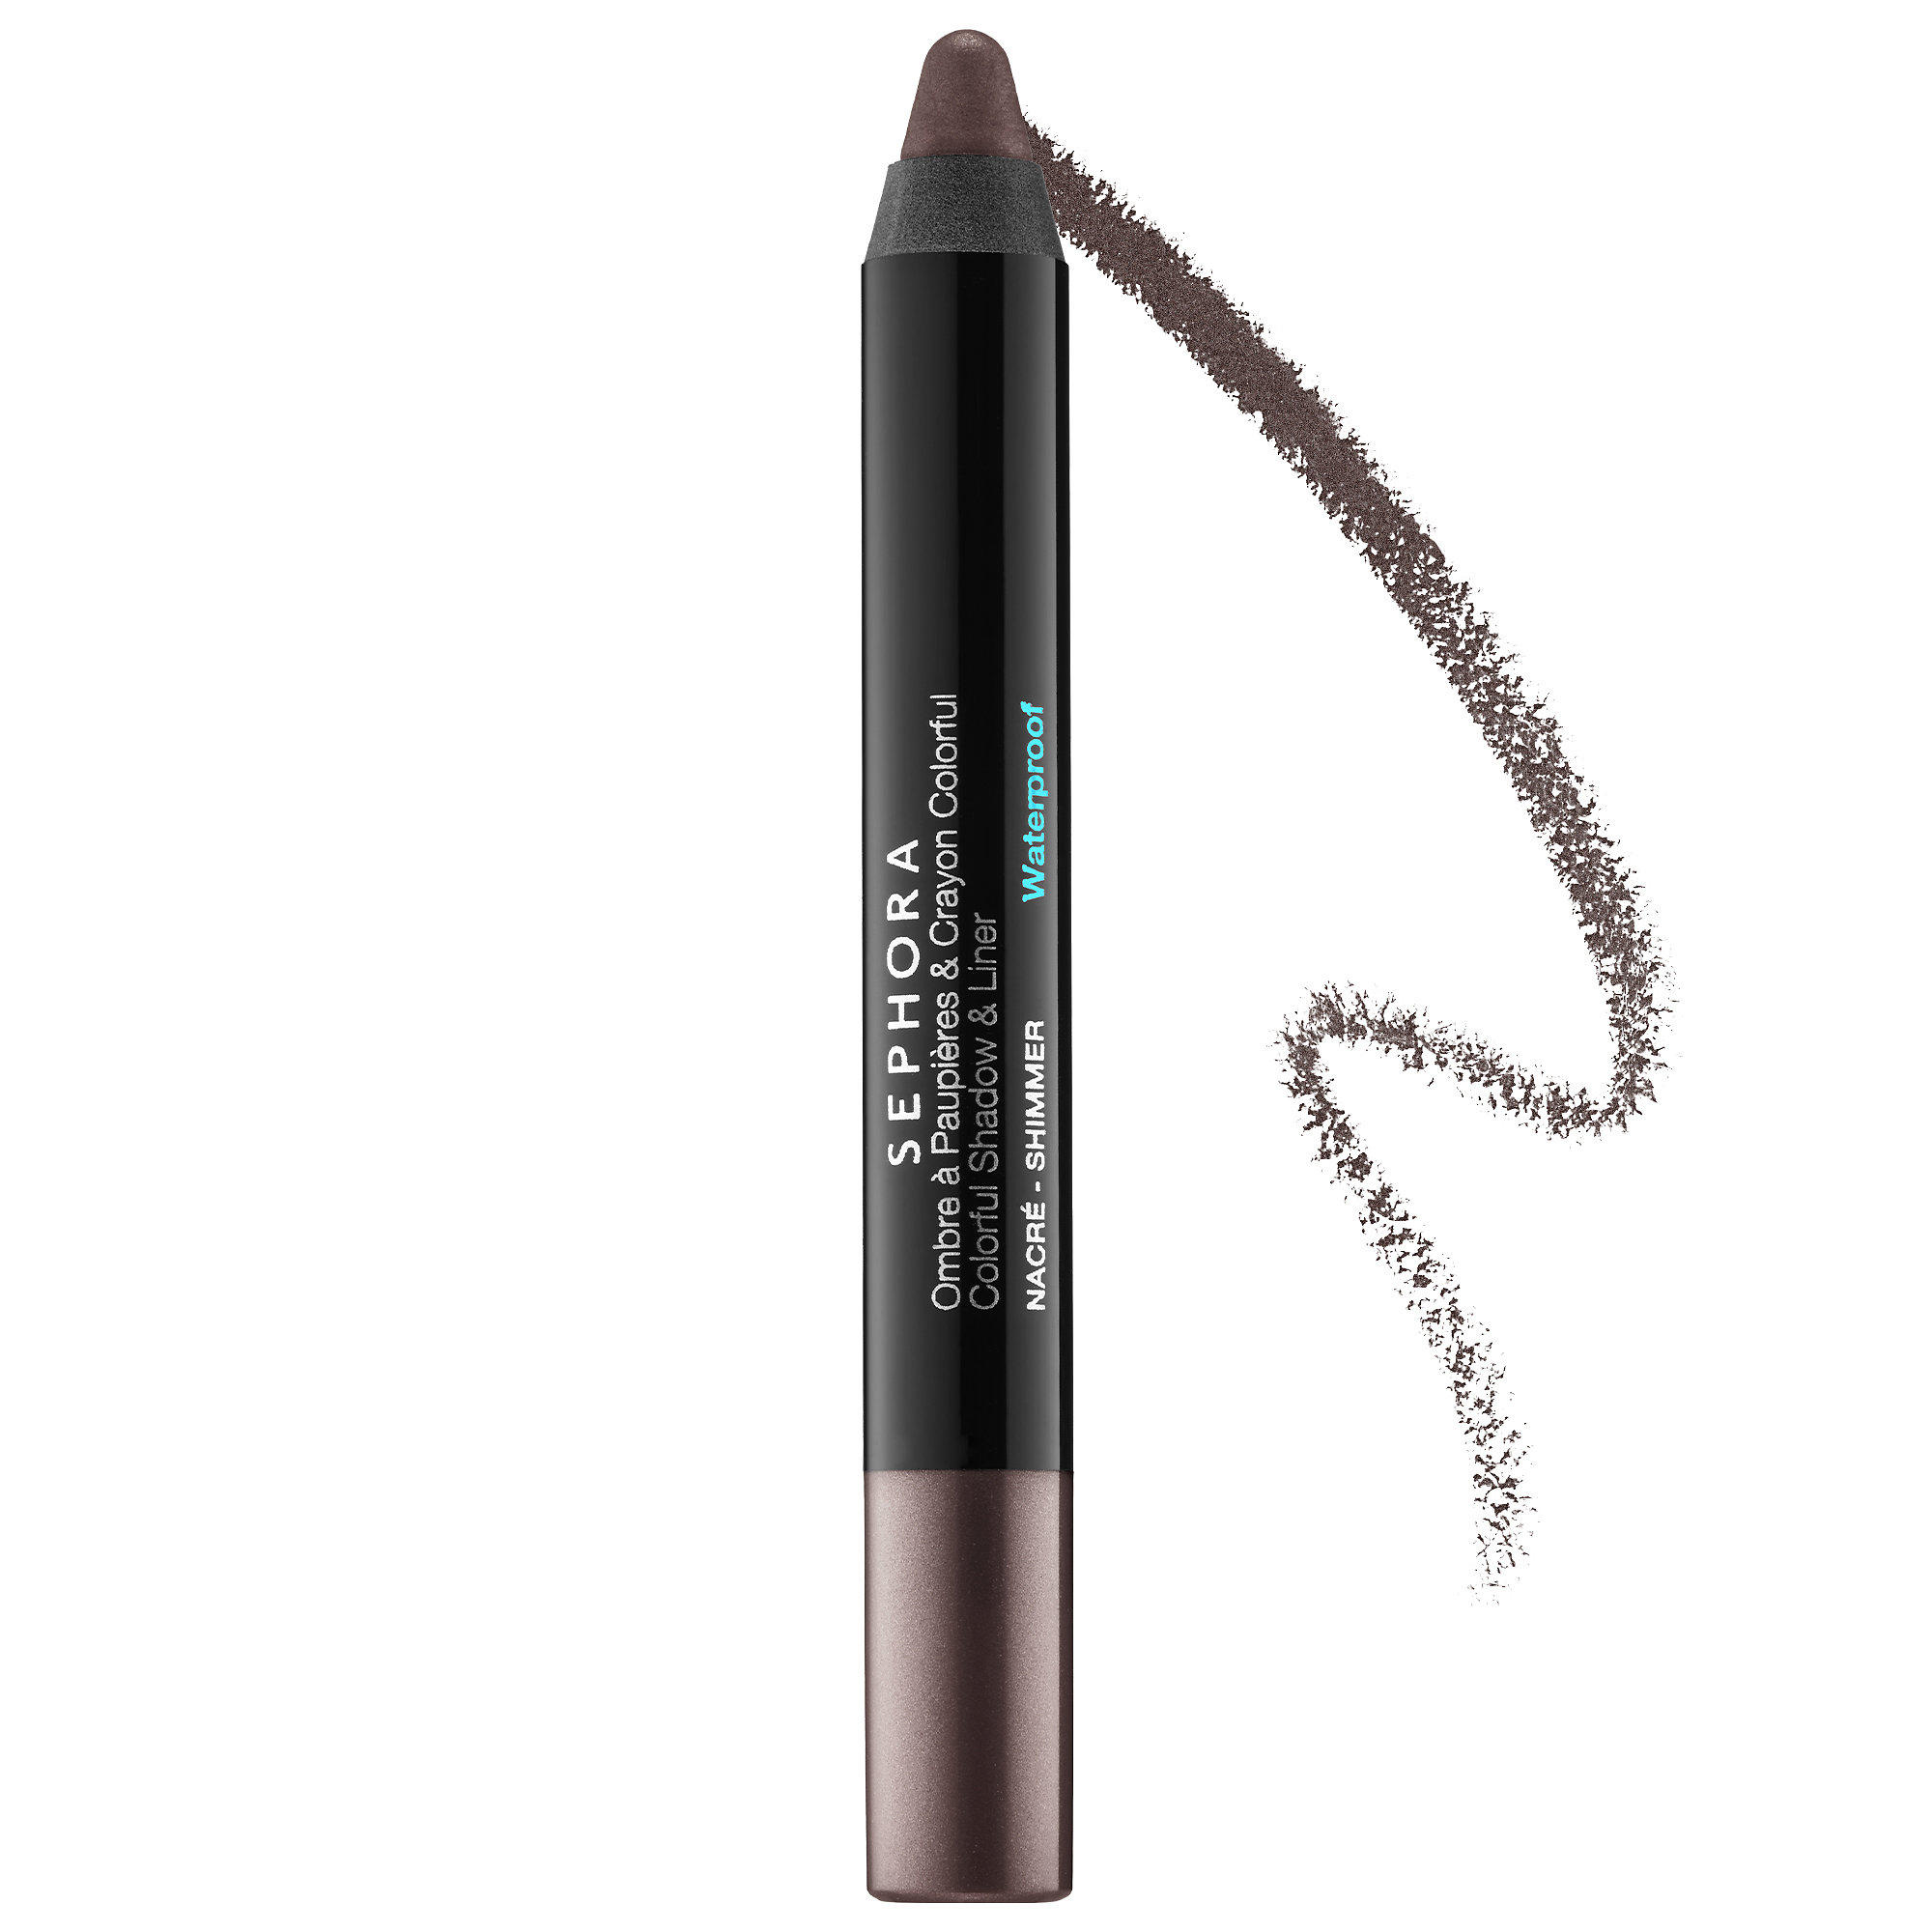 Sephora Colorful Shadow & Liner Dark Taupe Shimmer 22